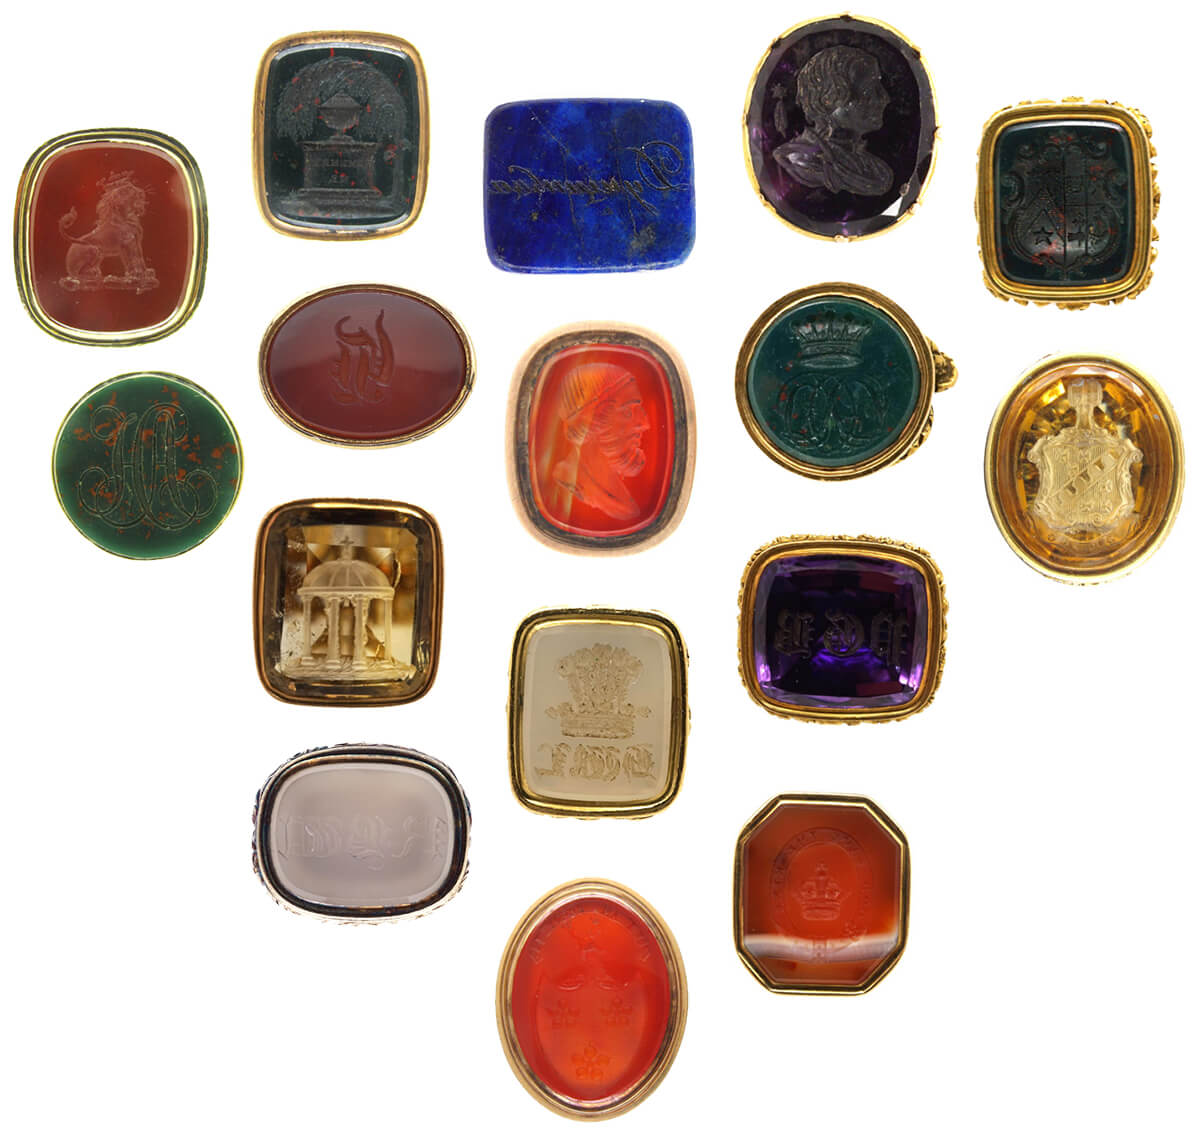 Antique seals come in all shapes, sizes and colours